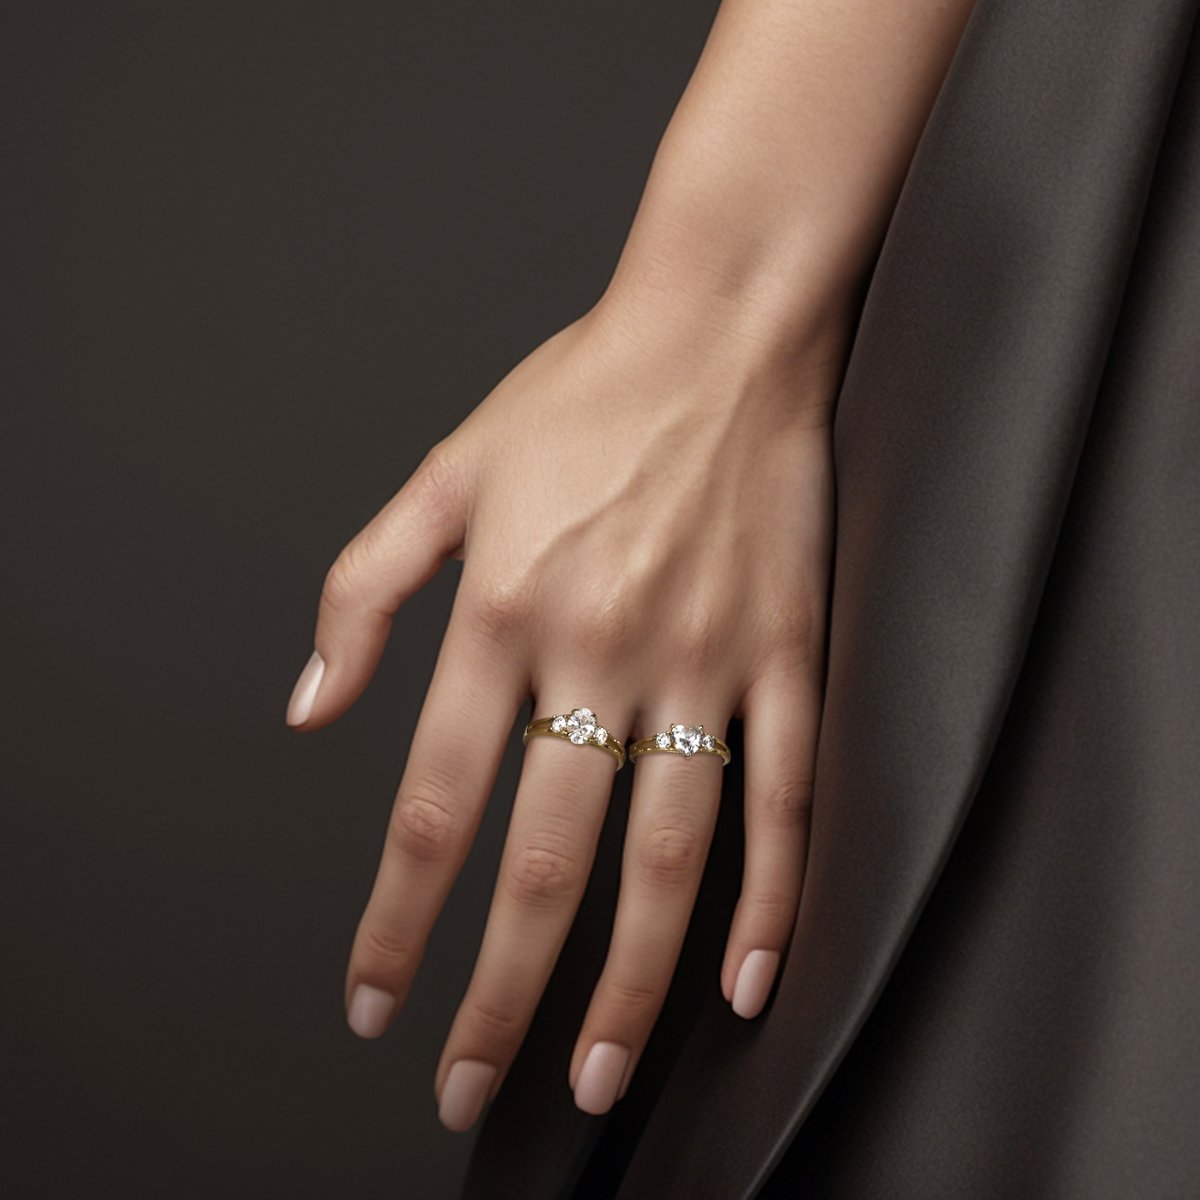 Sparkle in simplicity with this Colet Slim White CZ Ring crafted in 14k Gold. Effortlessly chic, it's the perfect accessory for any occasion. 💍✨

#nolters #noltersgold #14kgold #realgoldring #goldring #ring #14kgoldczring #losangeles #losangelescalifornia